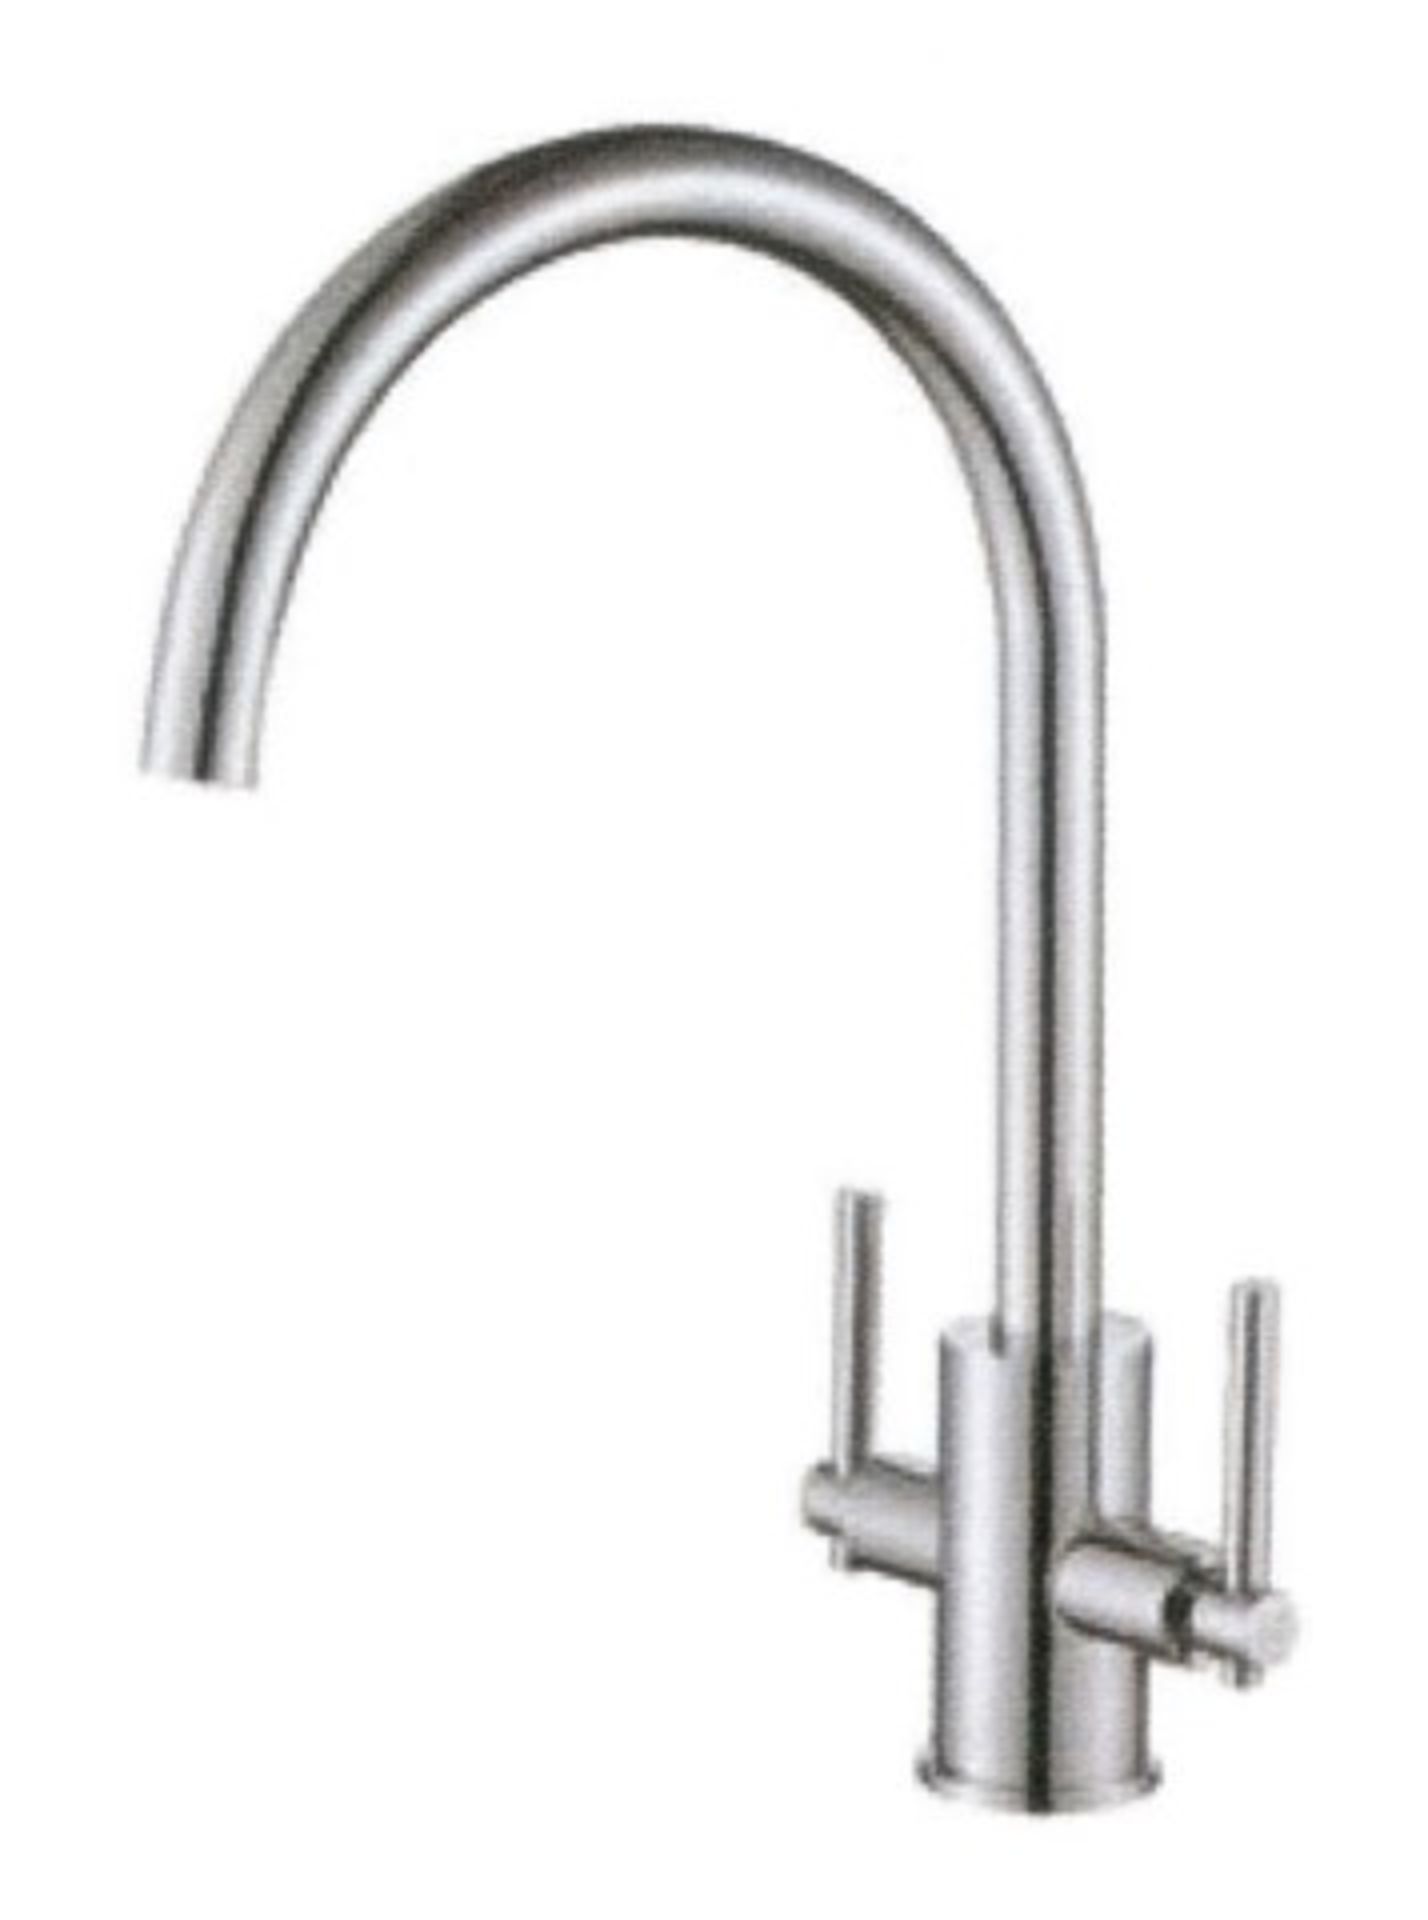 1 x High Quality Kitchen Sink Mixer Tap - Brass Construction Finished In Chrome - Brand New & Boxed